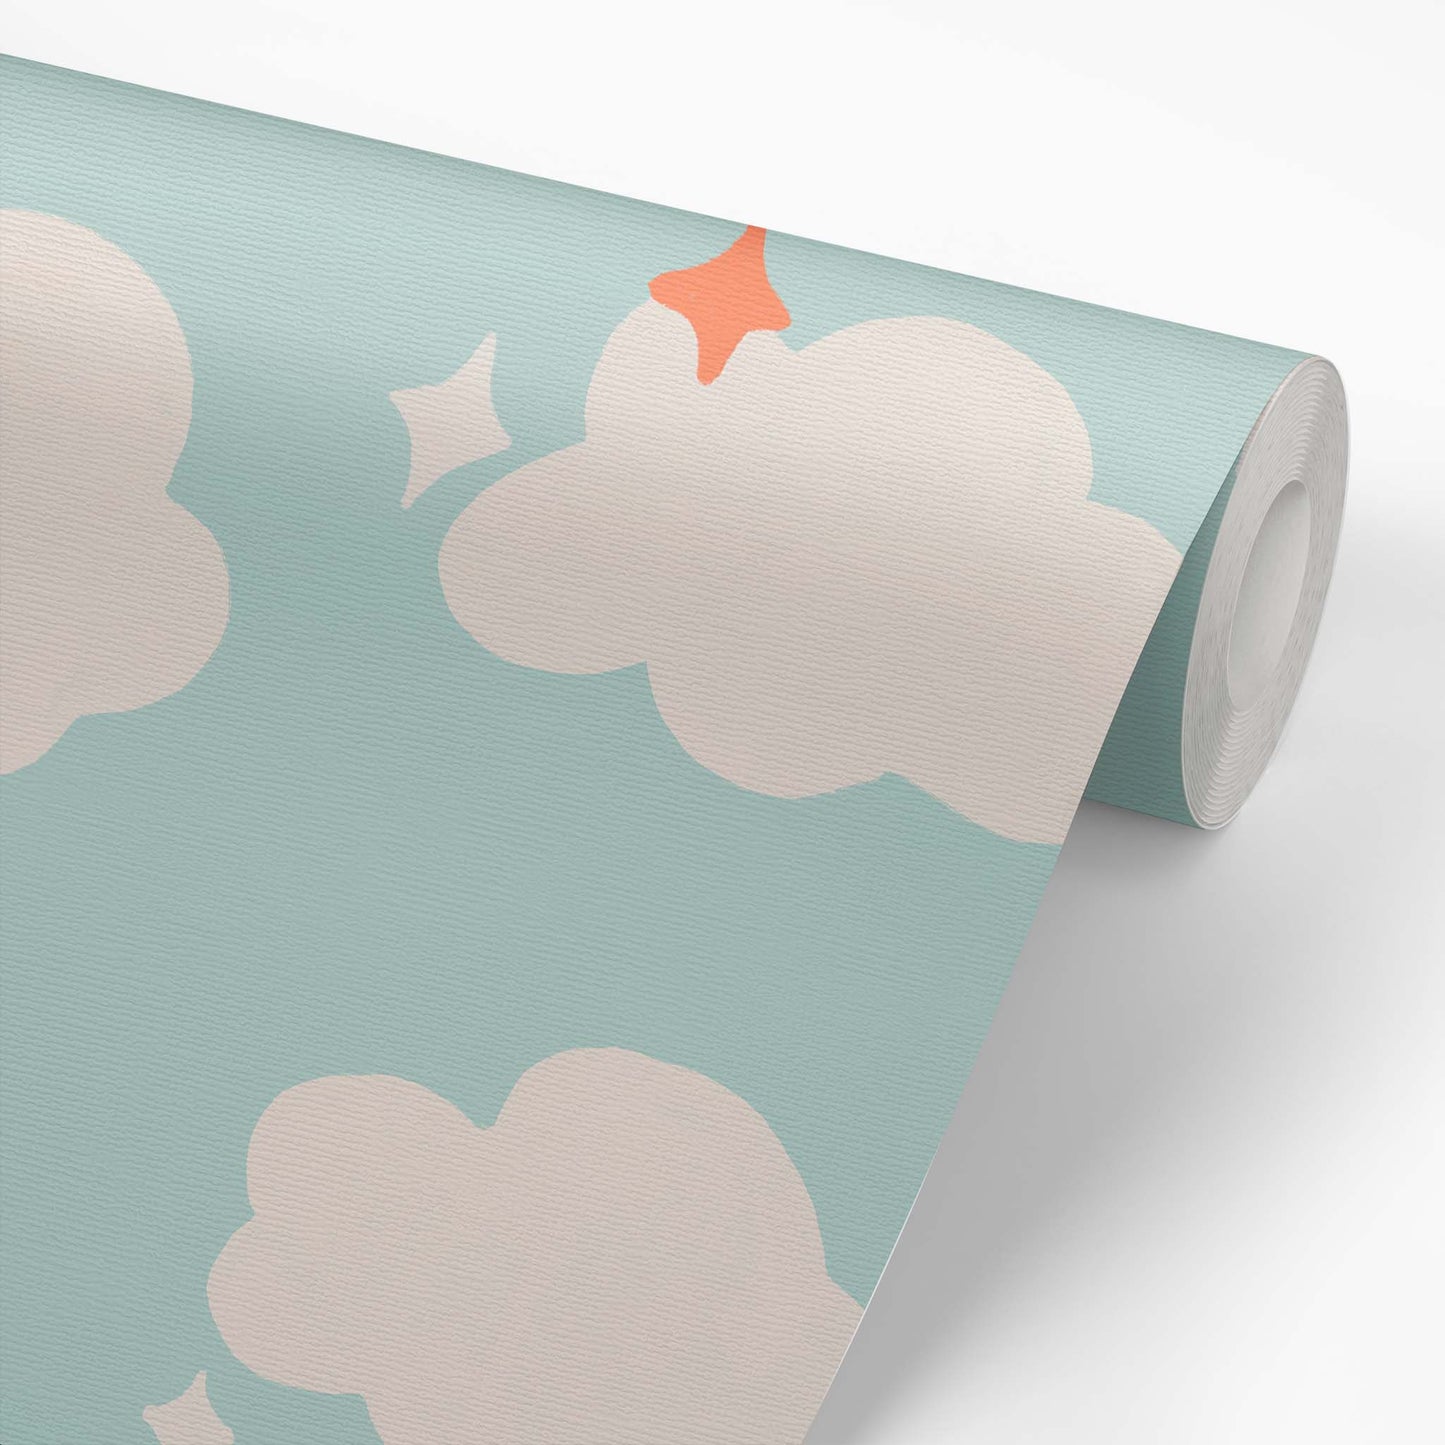 Wallpaper panel featuring Iris + Sea In the Clouds- Blue a cloud pattern